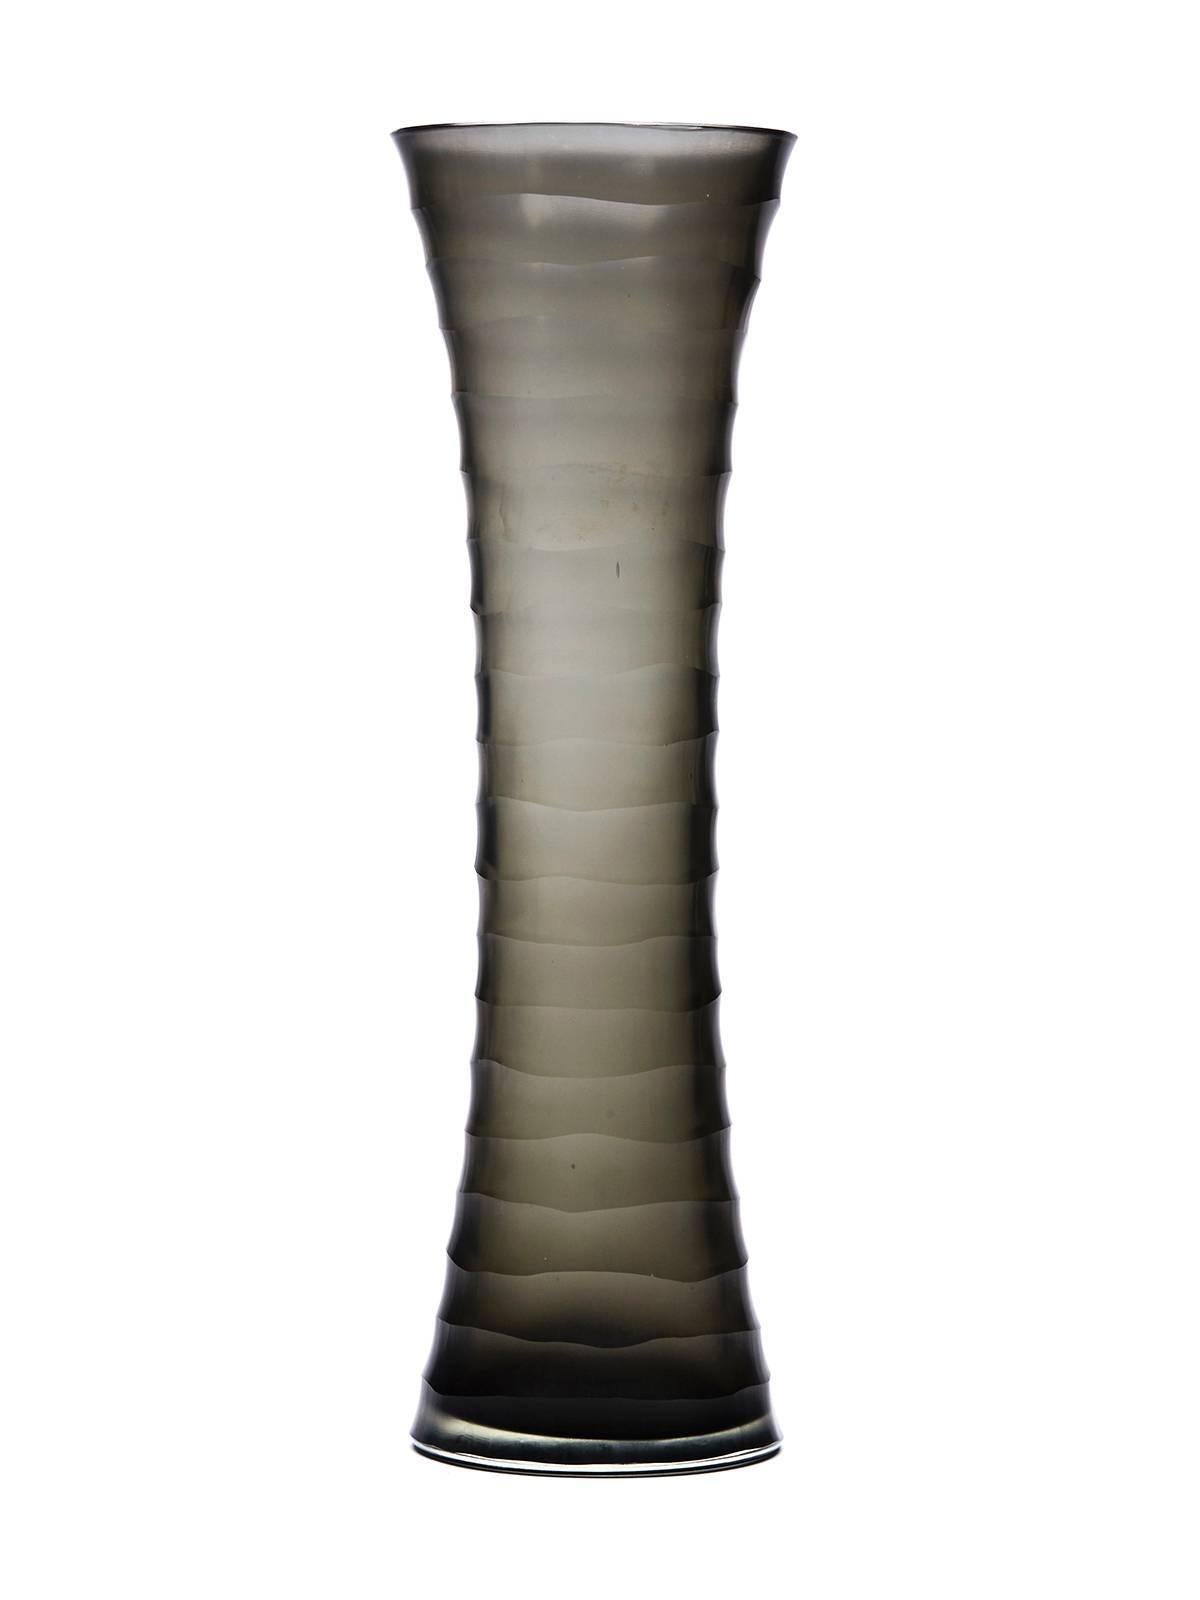 A stunning and unusual Italian Murano art glass battuto vase of tall narrow waisted shape in grey smoked glass with a ridge cut or battuto design in a frosted finish. The vase is not marked but reminiscent of the battuto styles being produced by